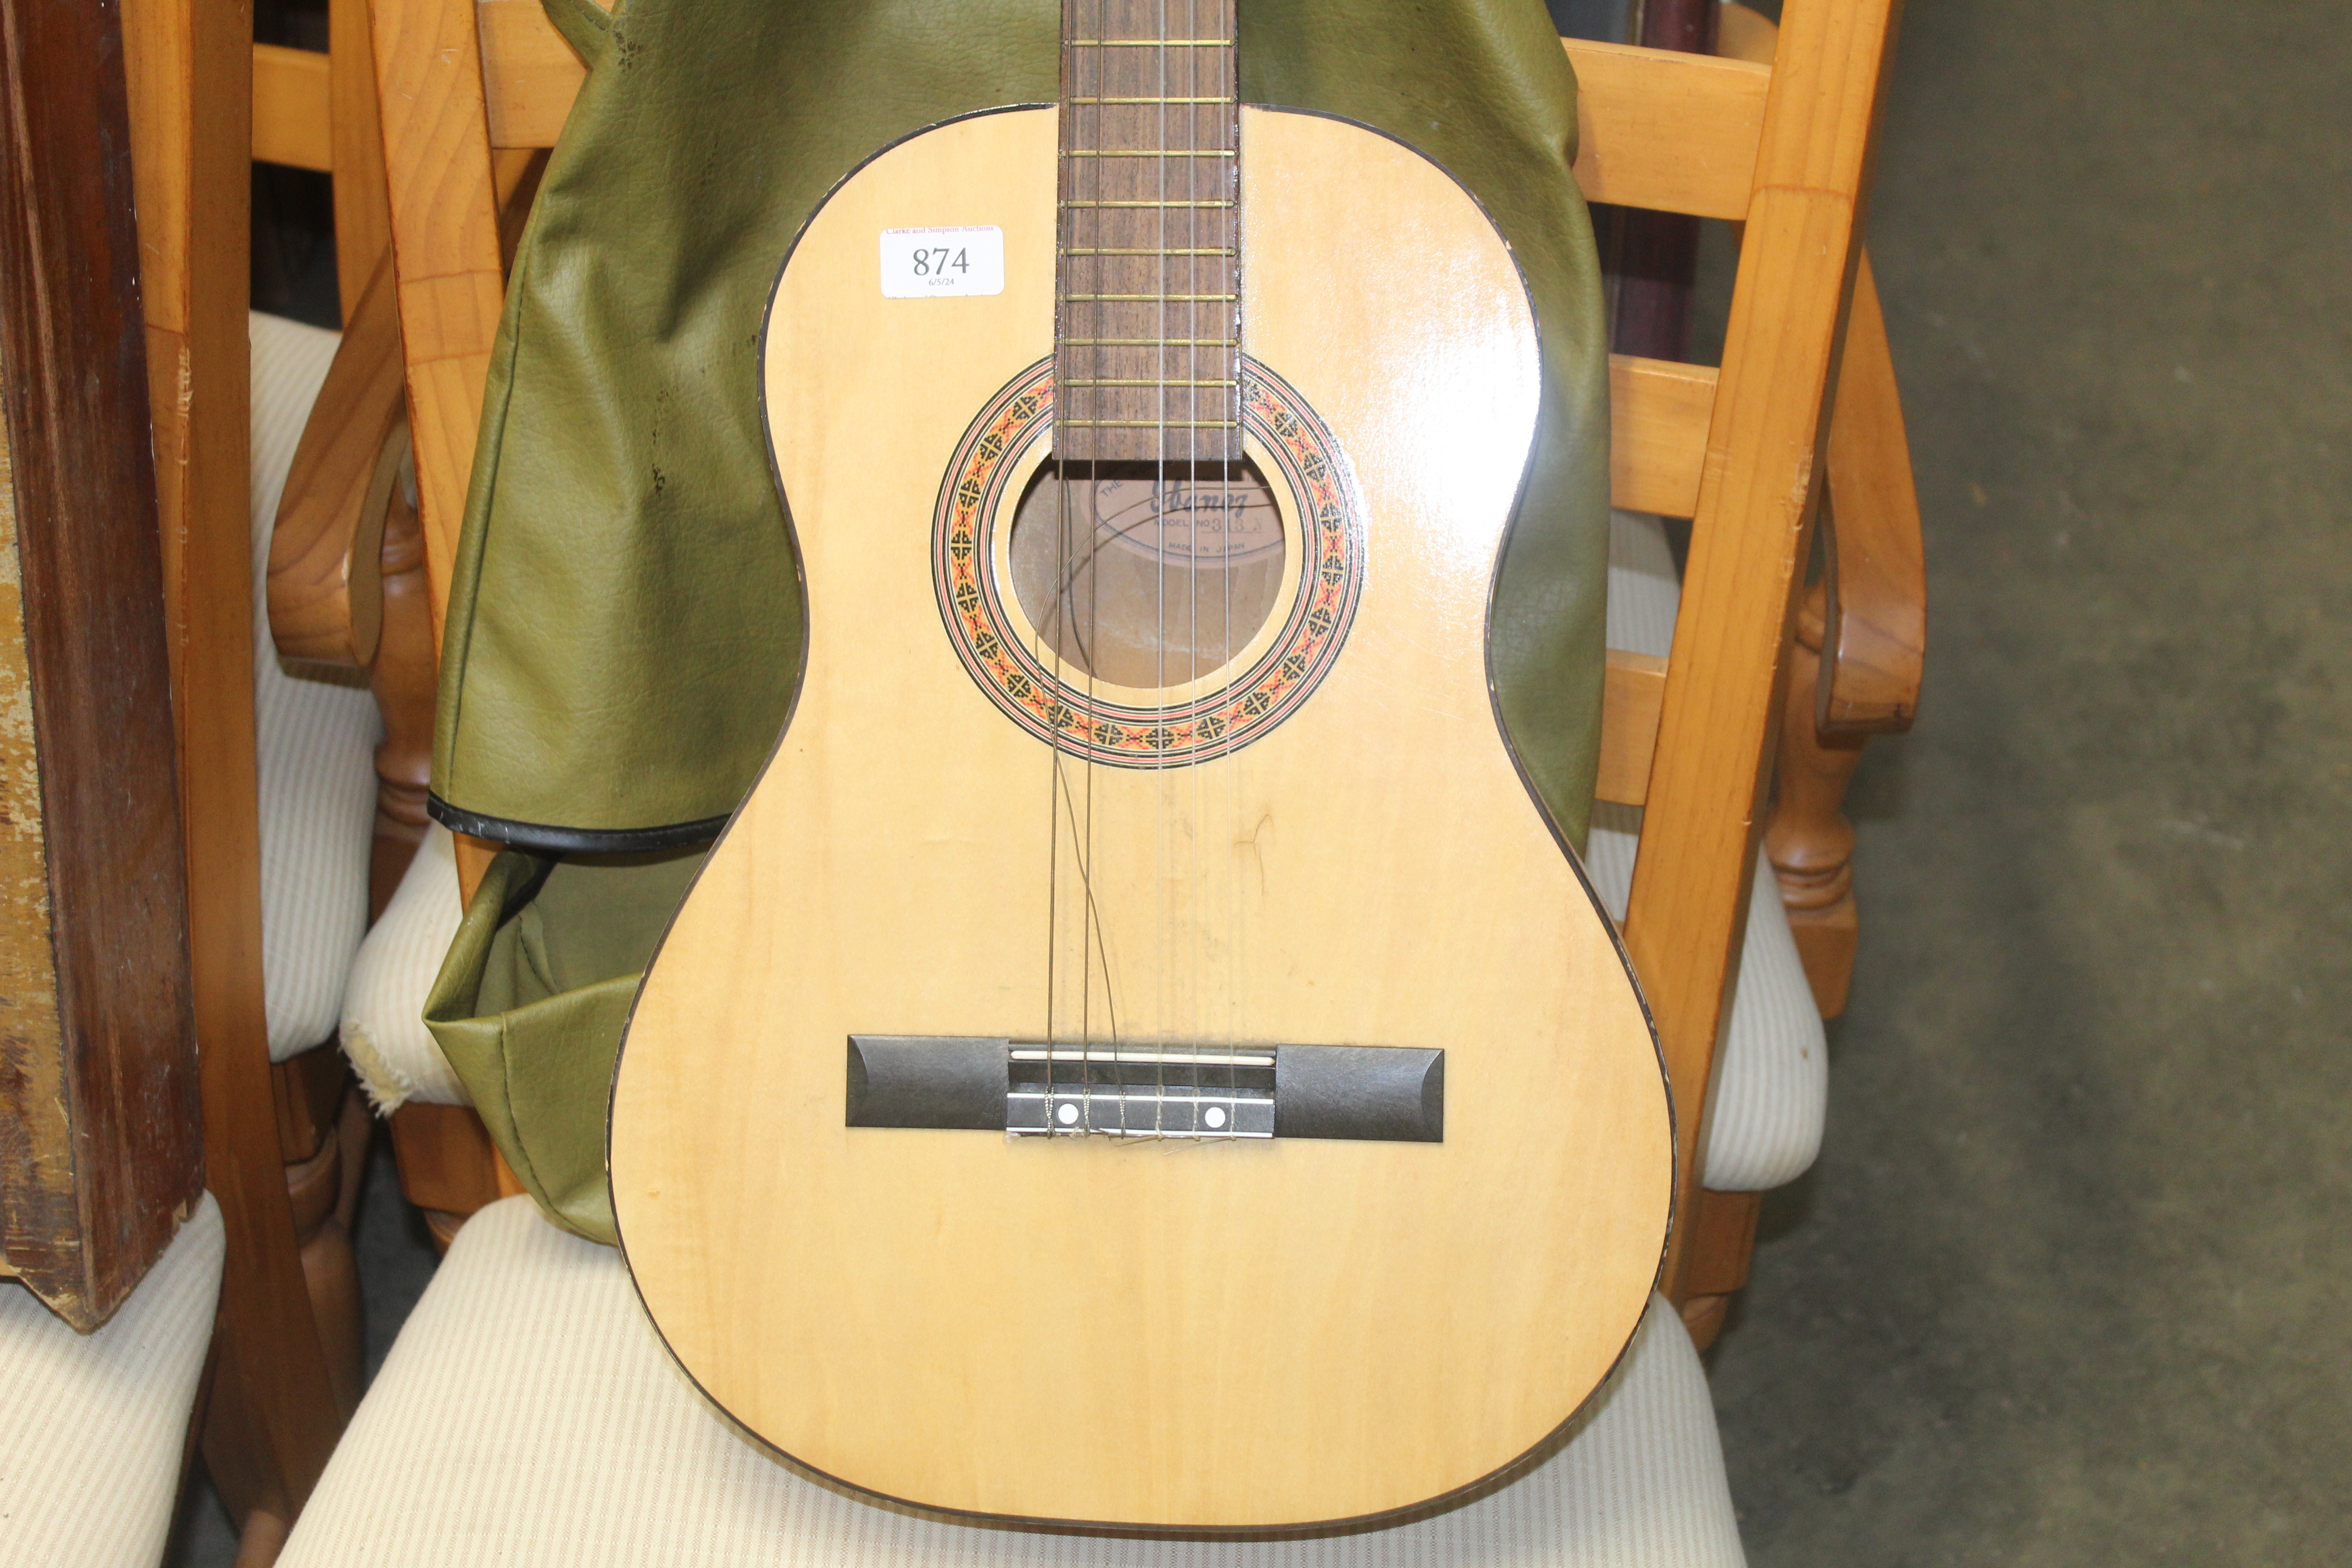 An acoustic guitar in carrying bag - Image 2 of 3